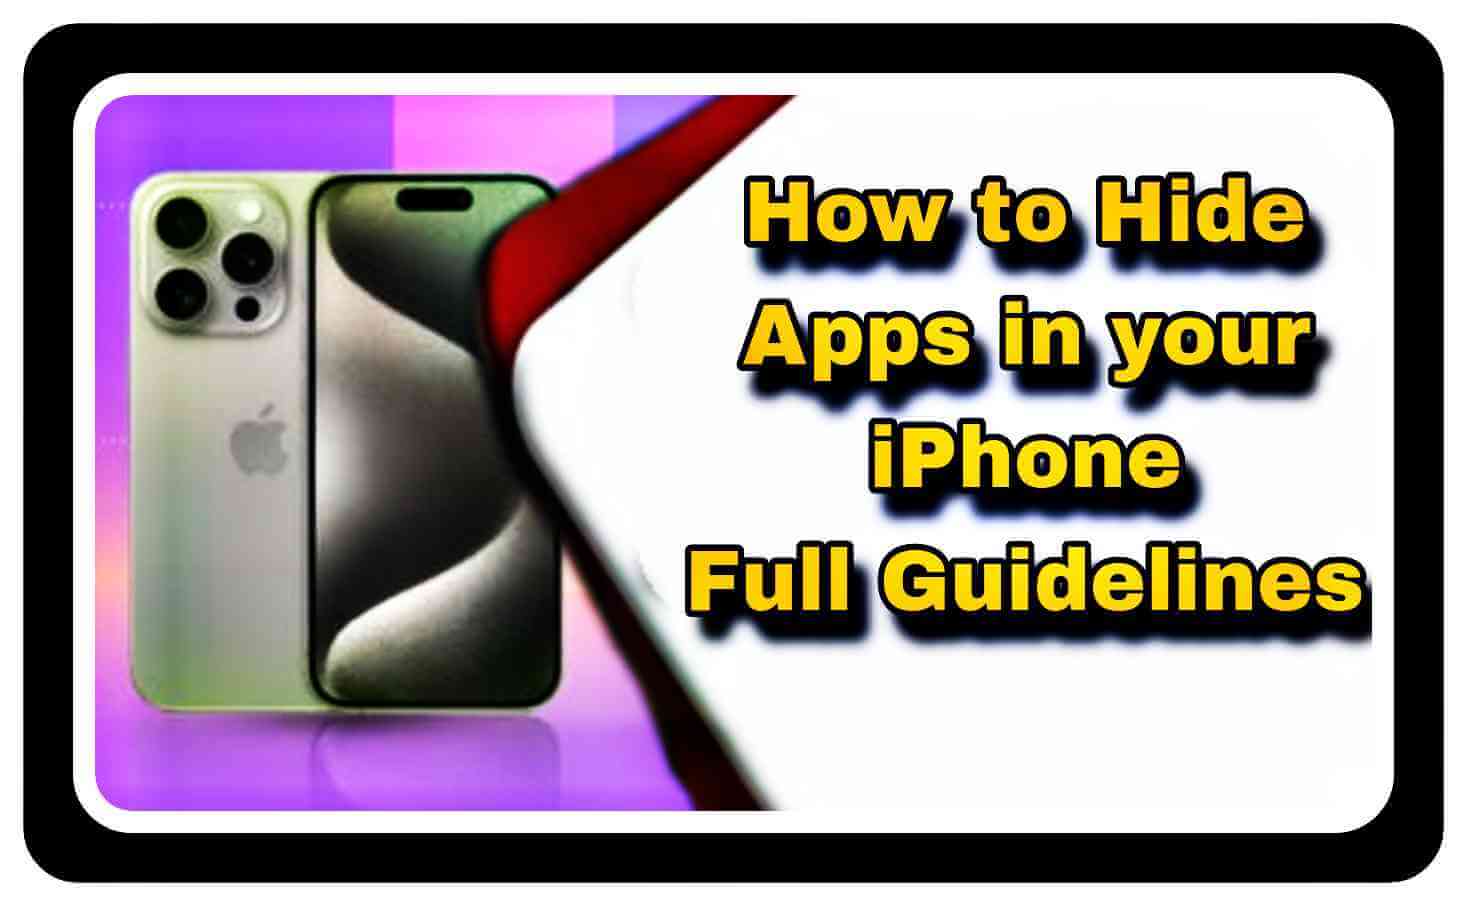 How to reduce your screen time by Hiding Apps?